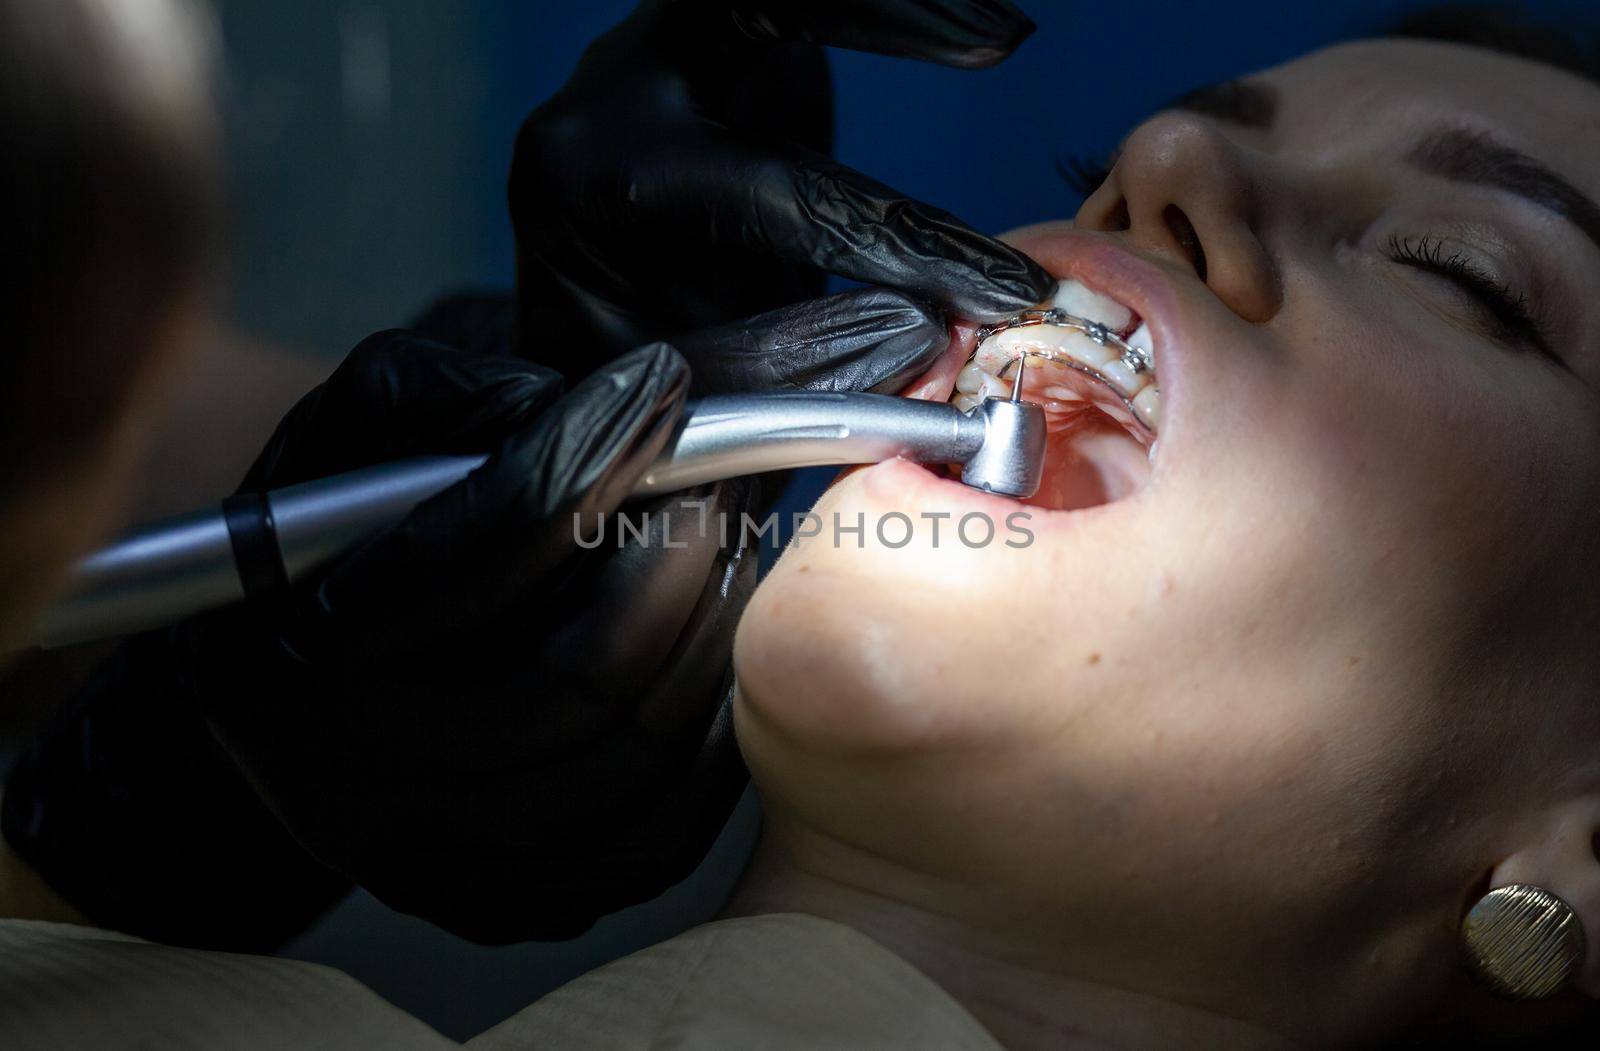 The process of removing braces.Beautiful woman in dental chair during procedure of installing braces to upper and lower teeth. Dentist and assistant working together, dental tools in their hands.